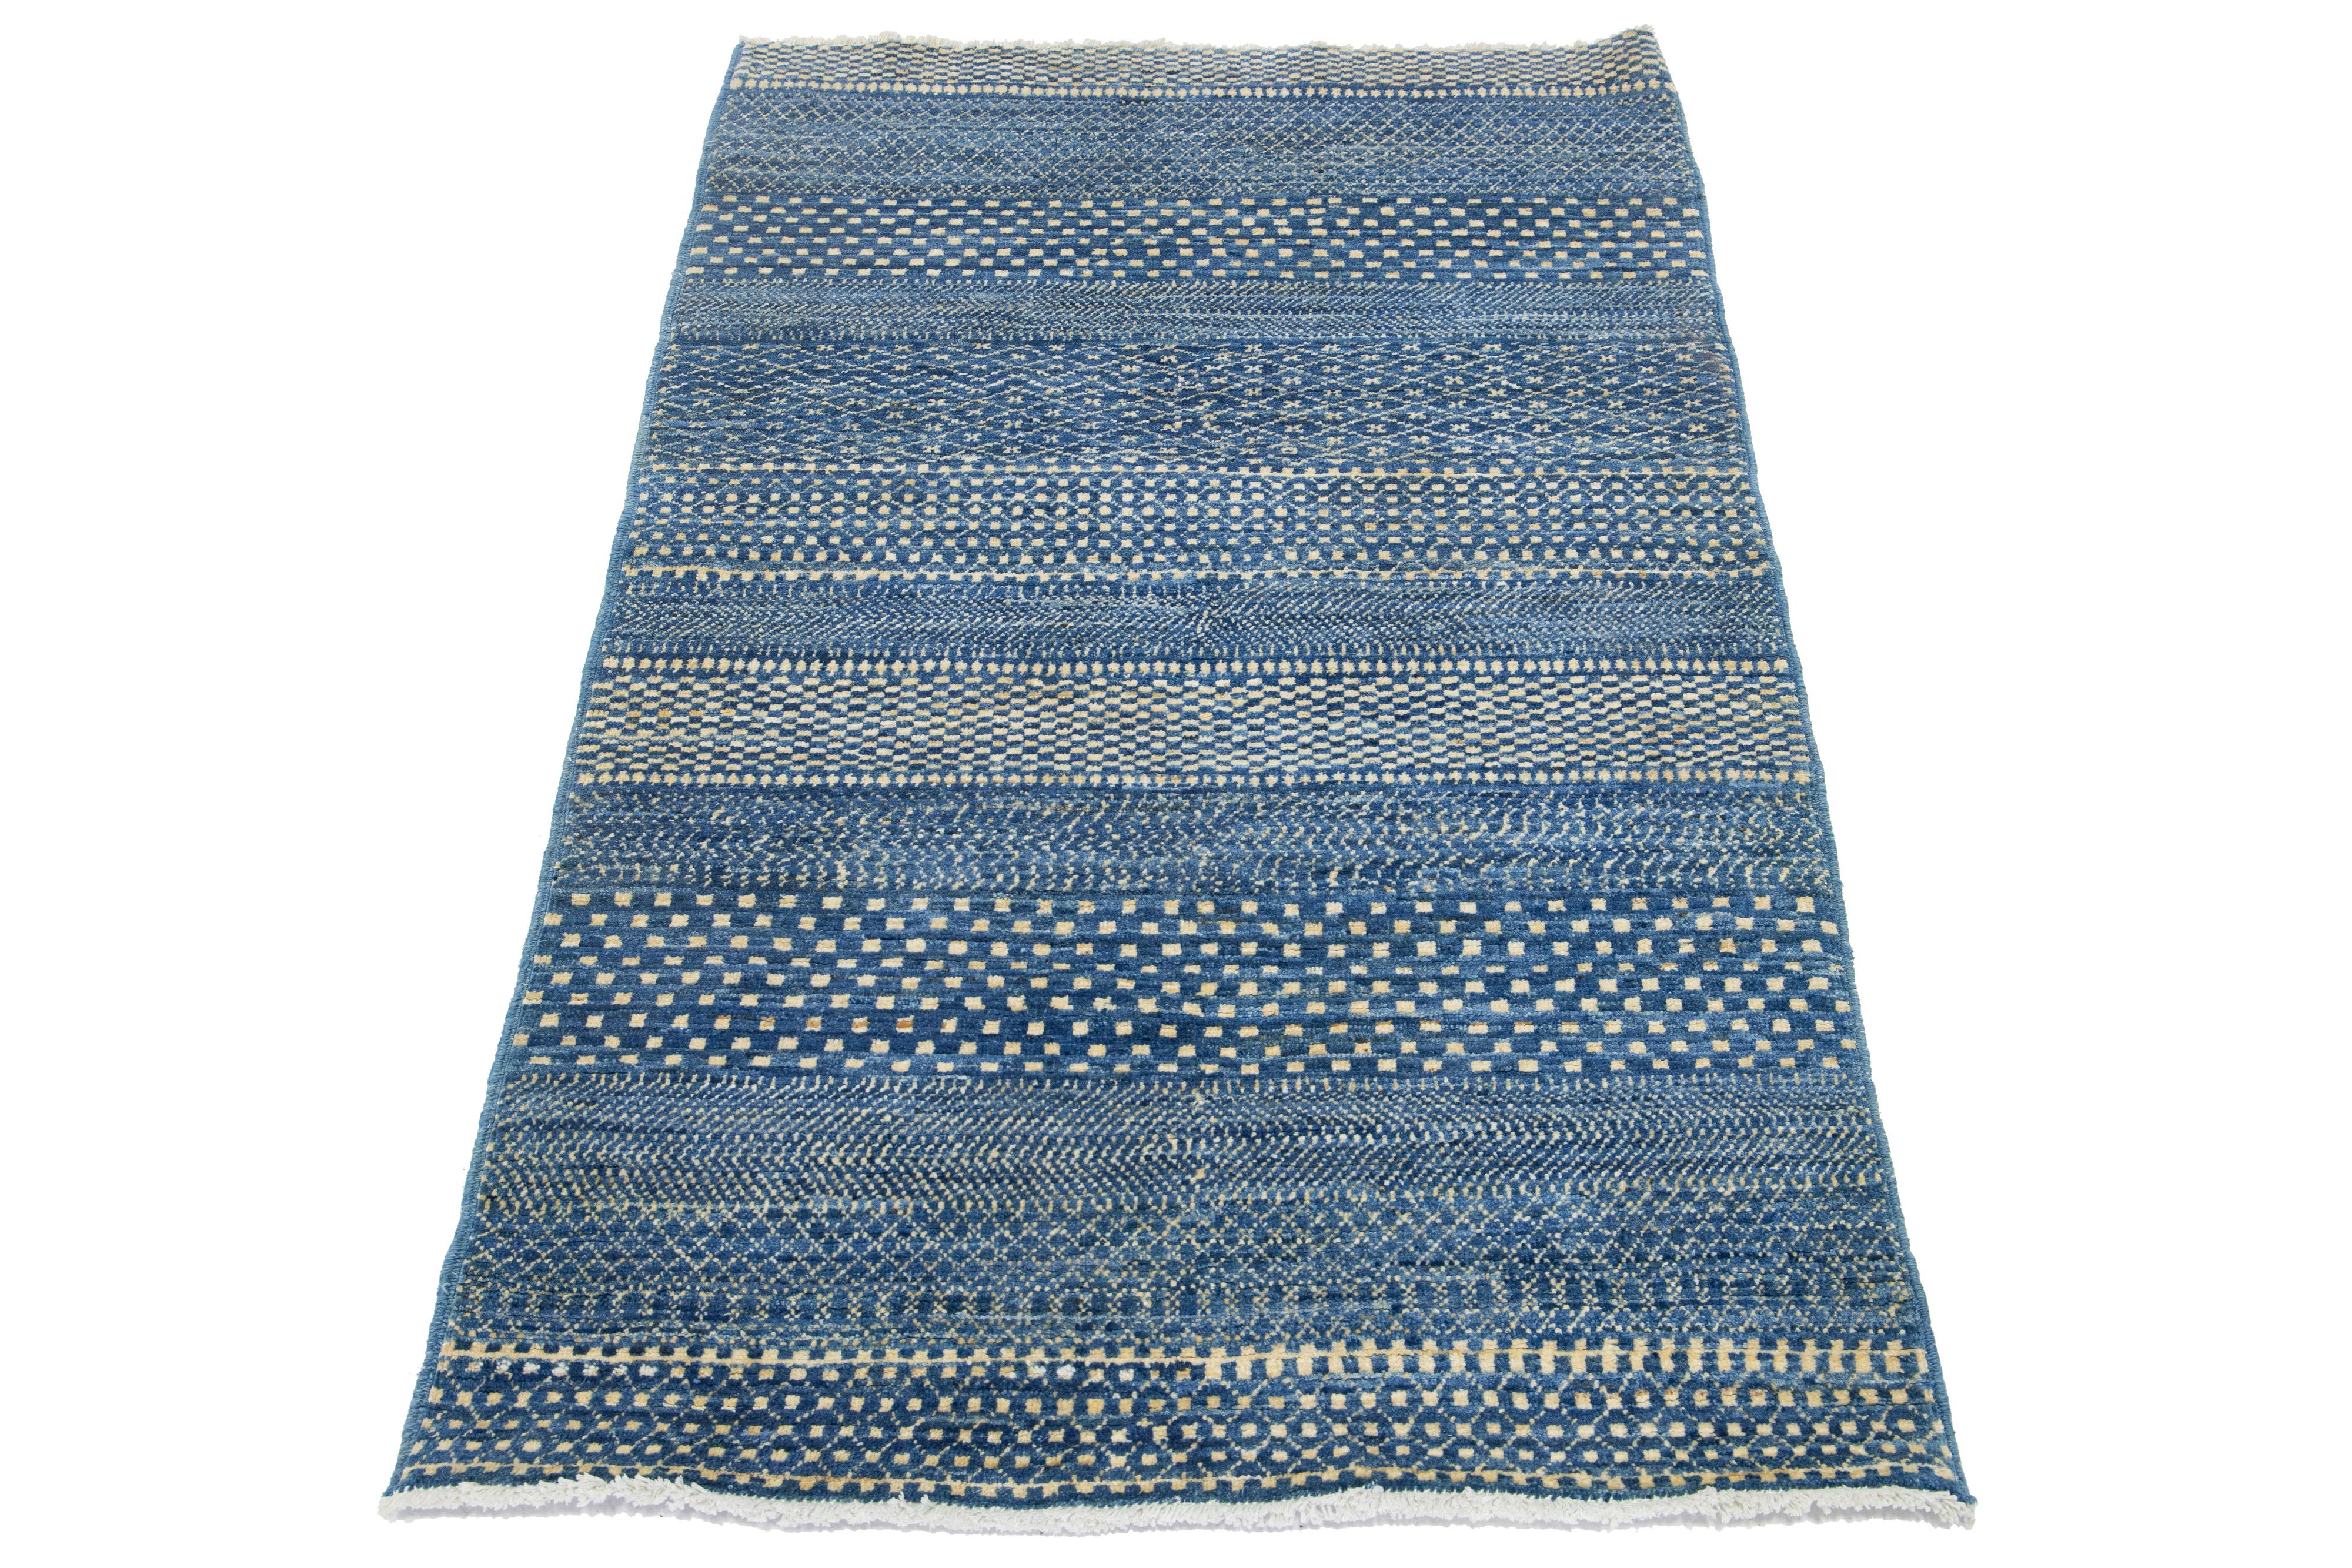 This handcrafted wool rug, designed in Afghanistan, showcases a geometric pattern accentuated by ivory color against a vibrant blue background.

This rug measures 3'2